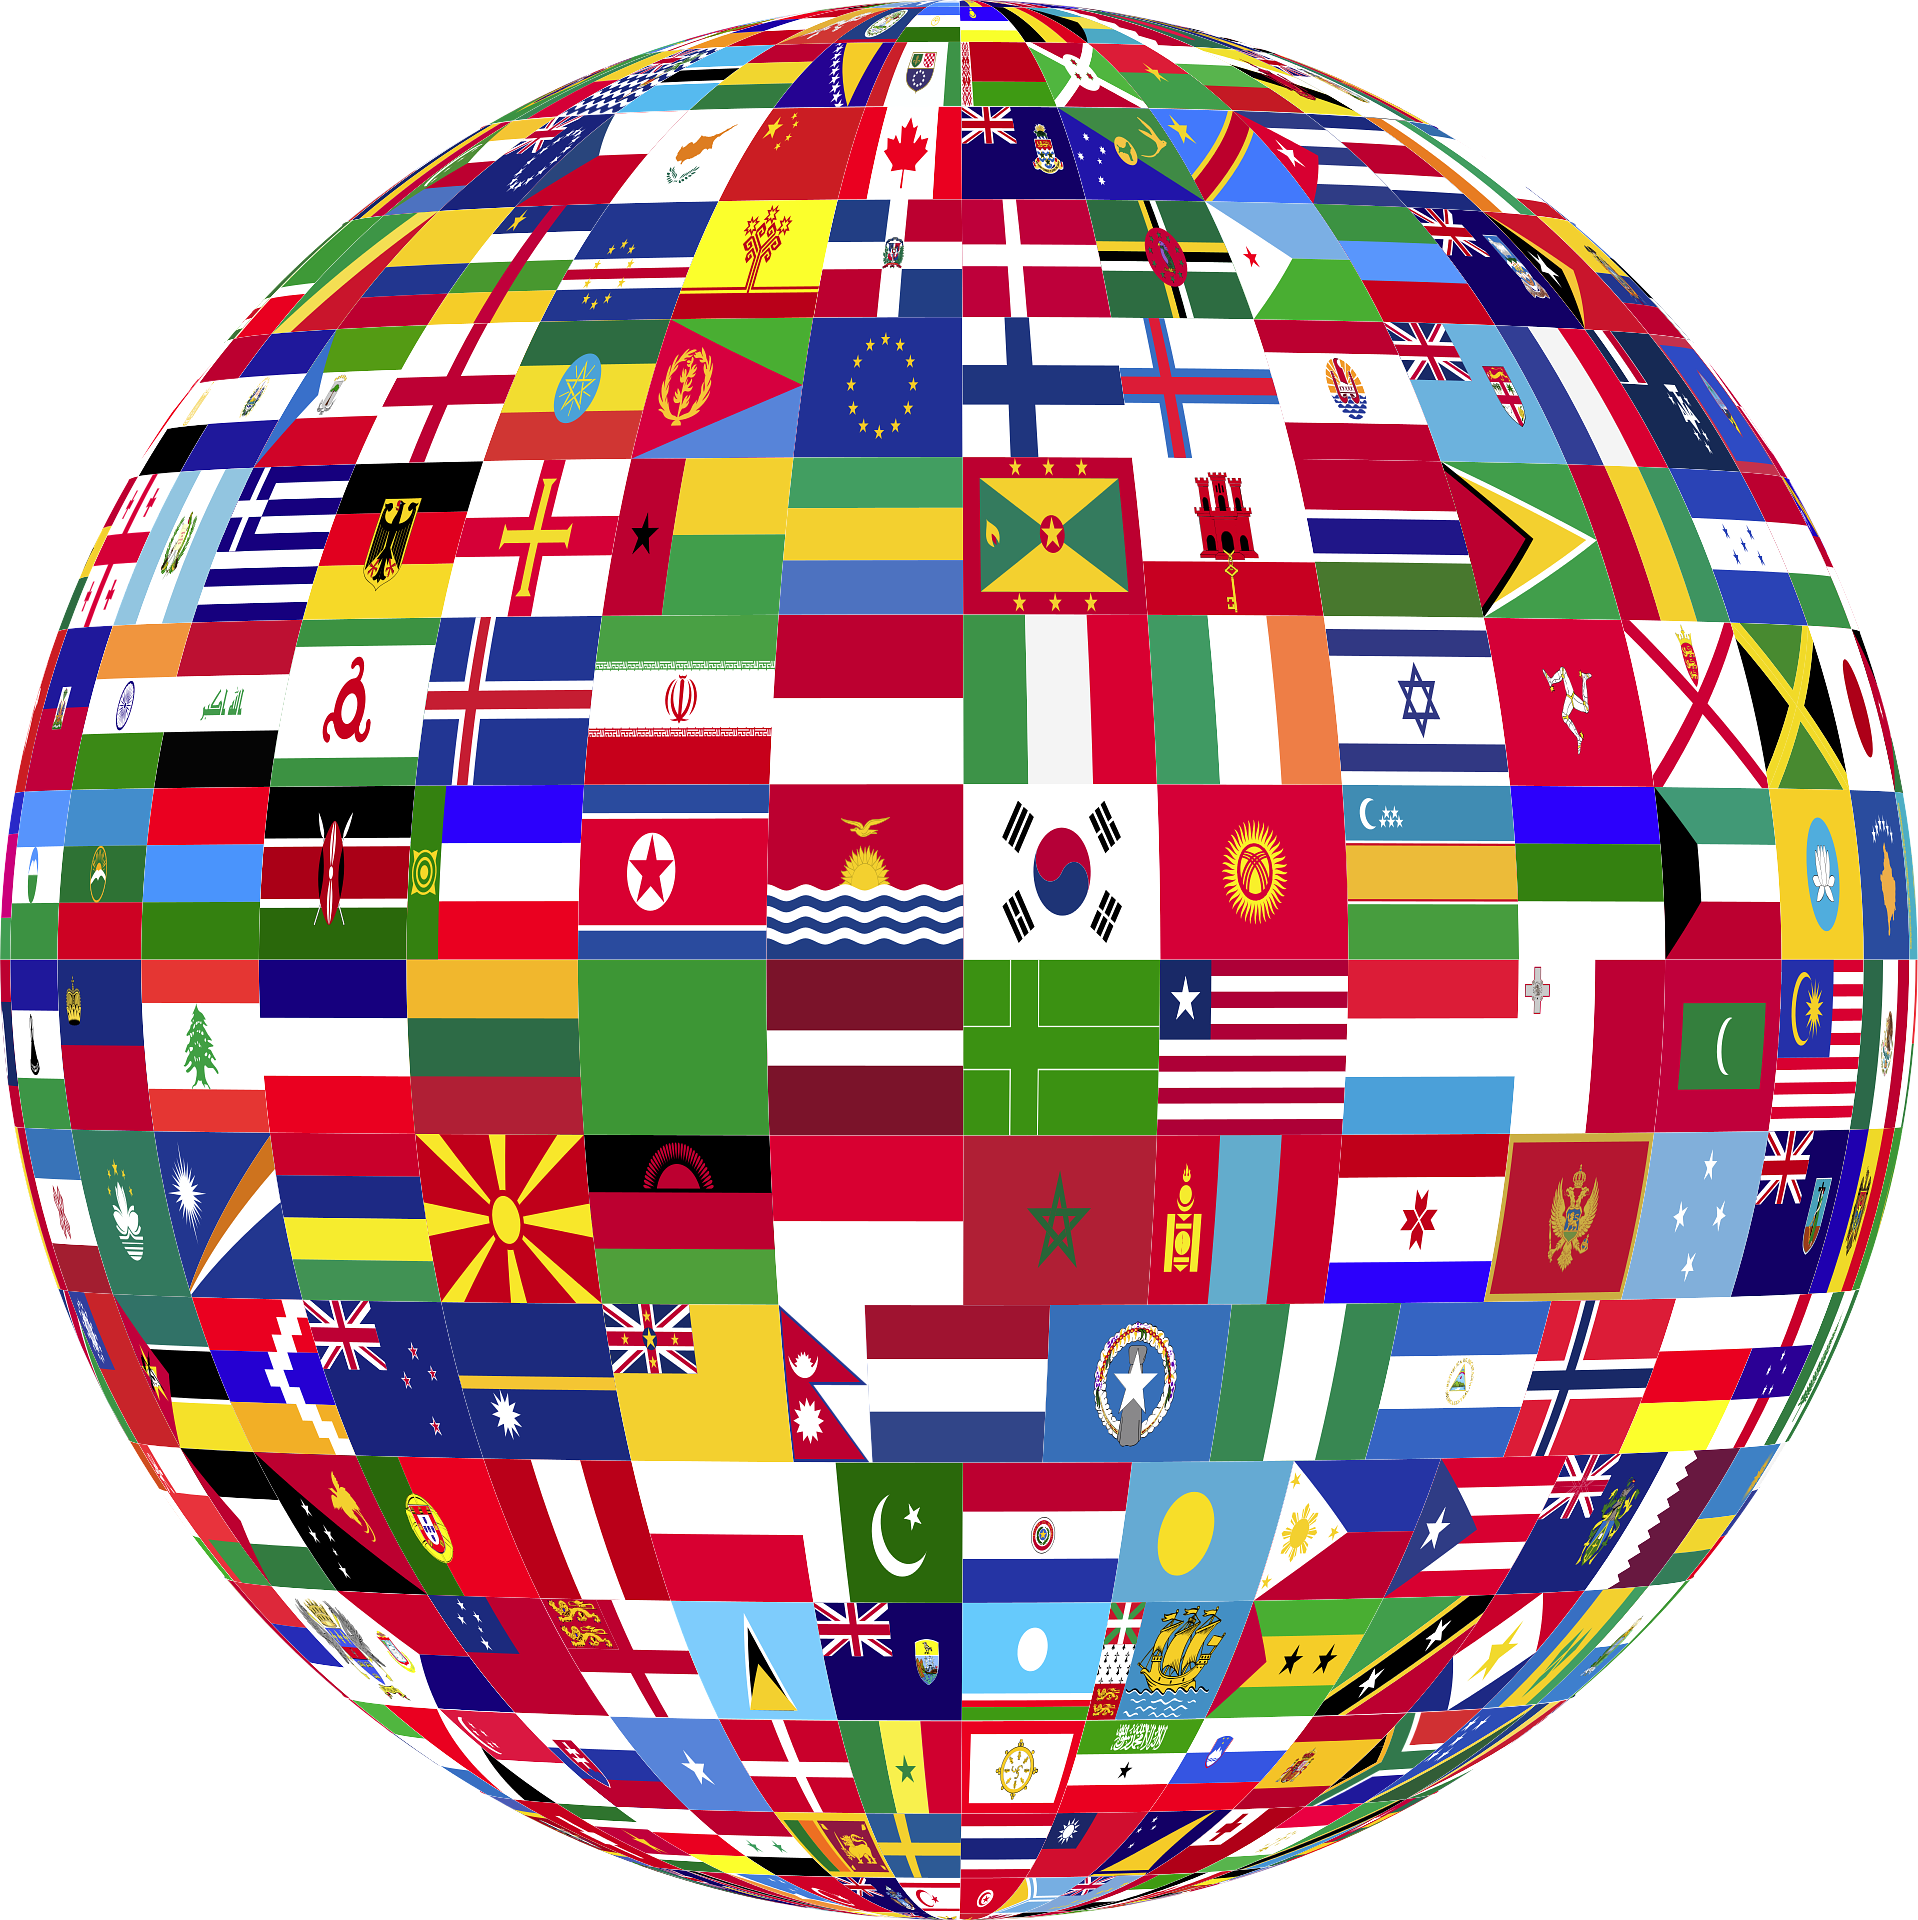 A stylised image of the globe containing various national flags.